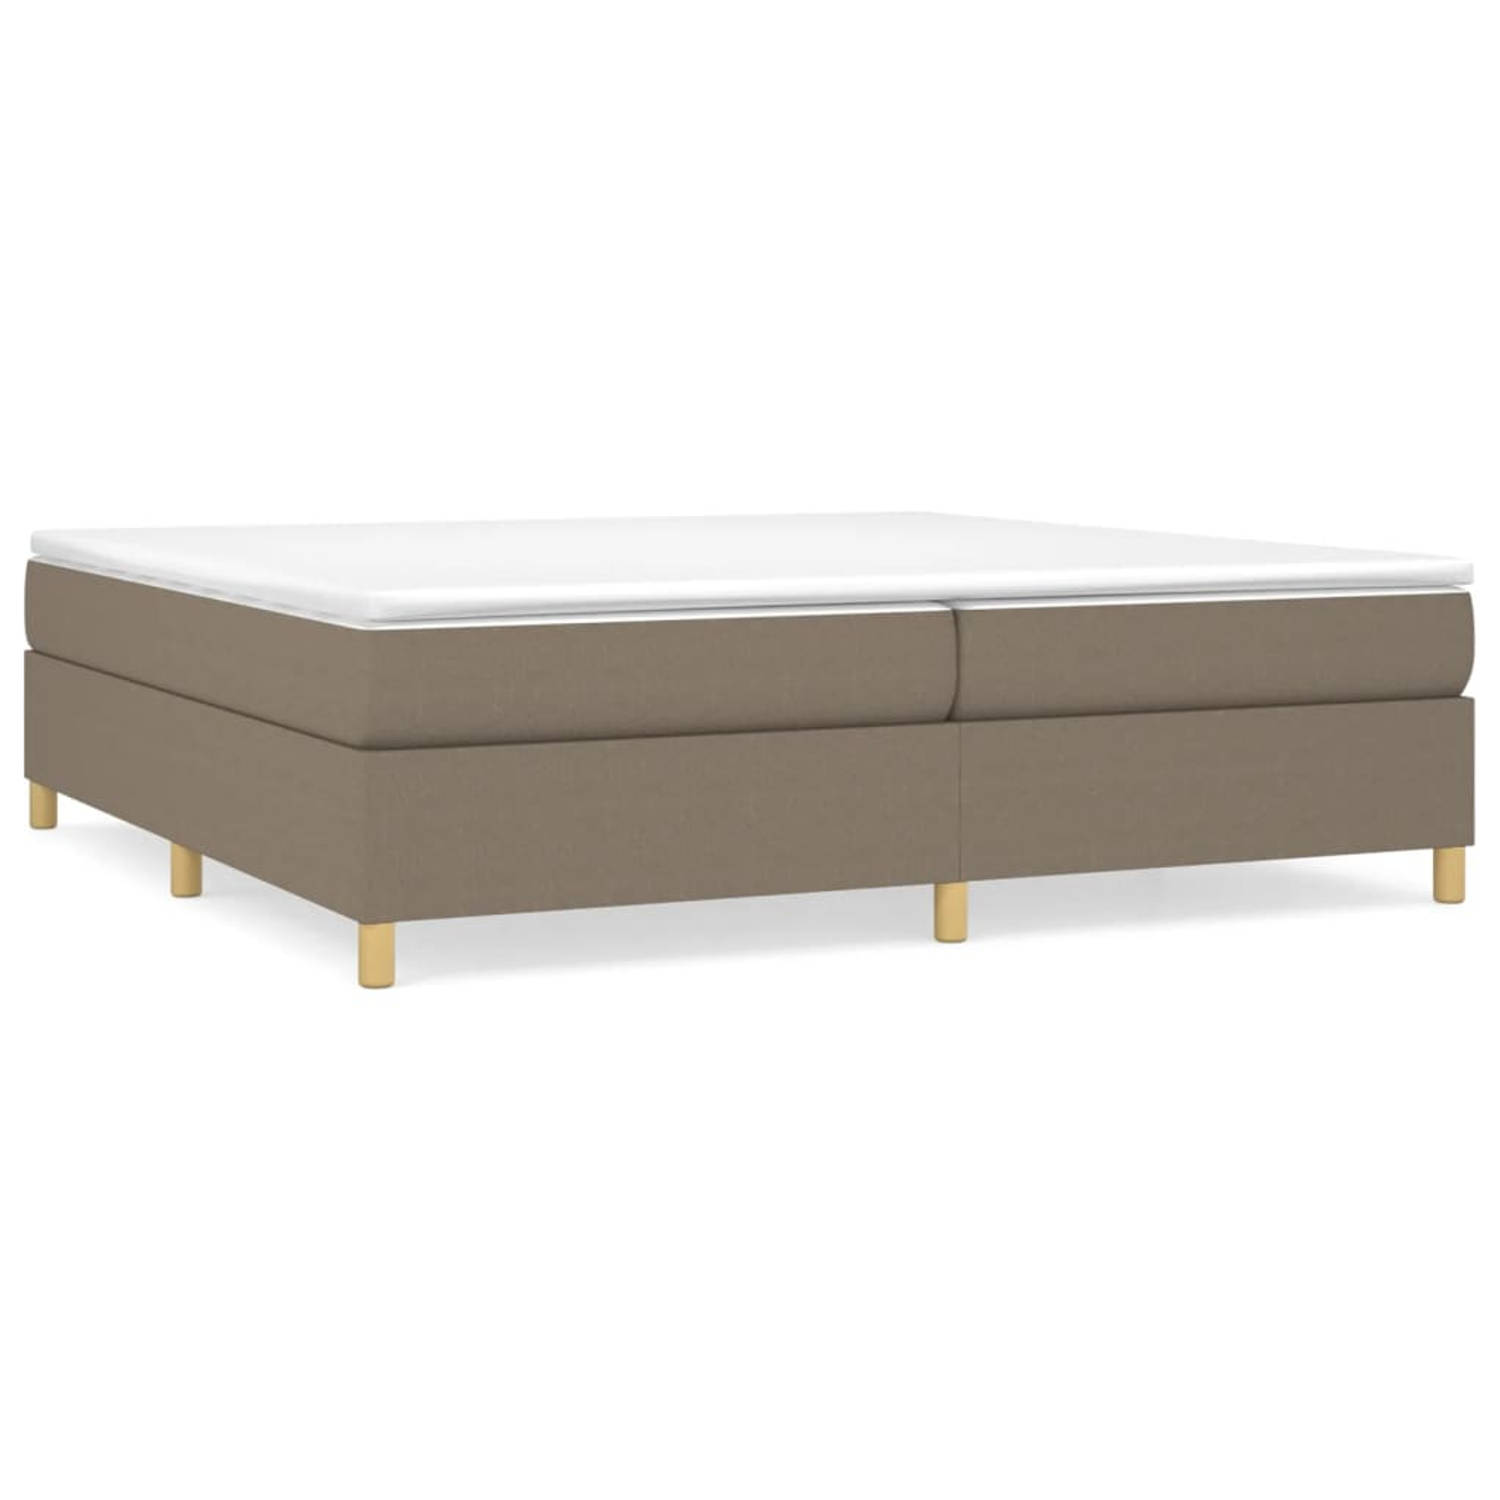 The Living Store Boxspringframe stof taupe 200x200 cm - Boxspringframe - Boxspringframes - Bed - Ledikant - Slaapmeubel - Bedframe - Bedbodem - Tweepersoonsbed - Boxspring - Bedden